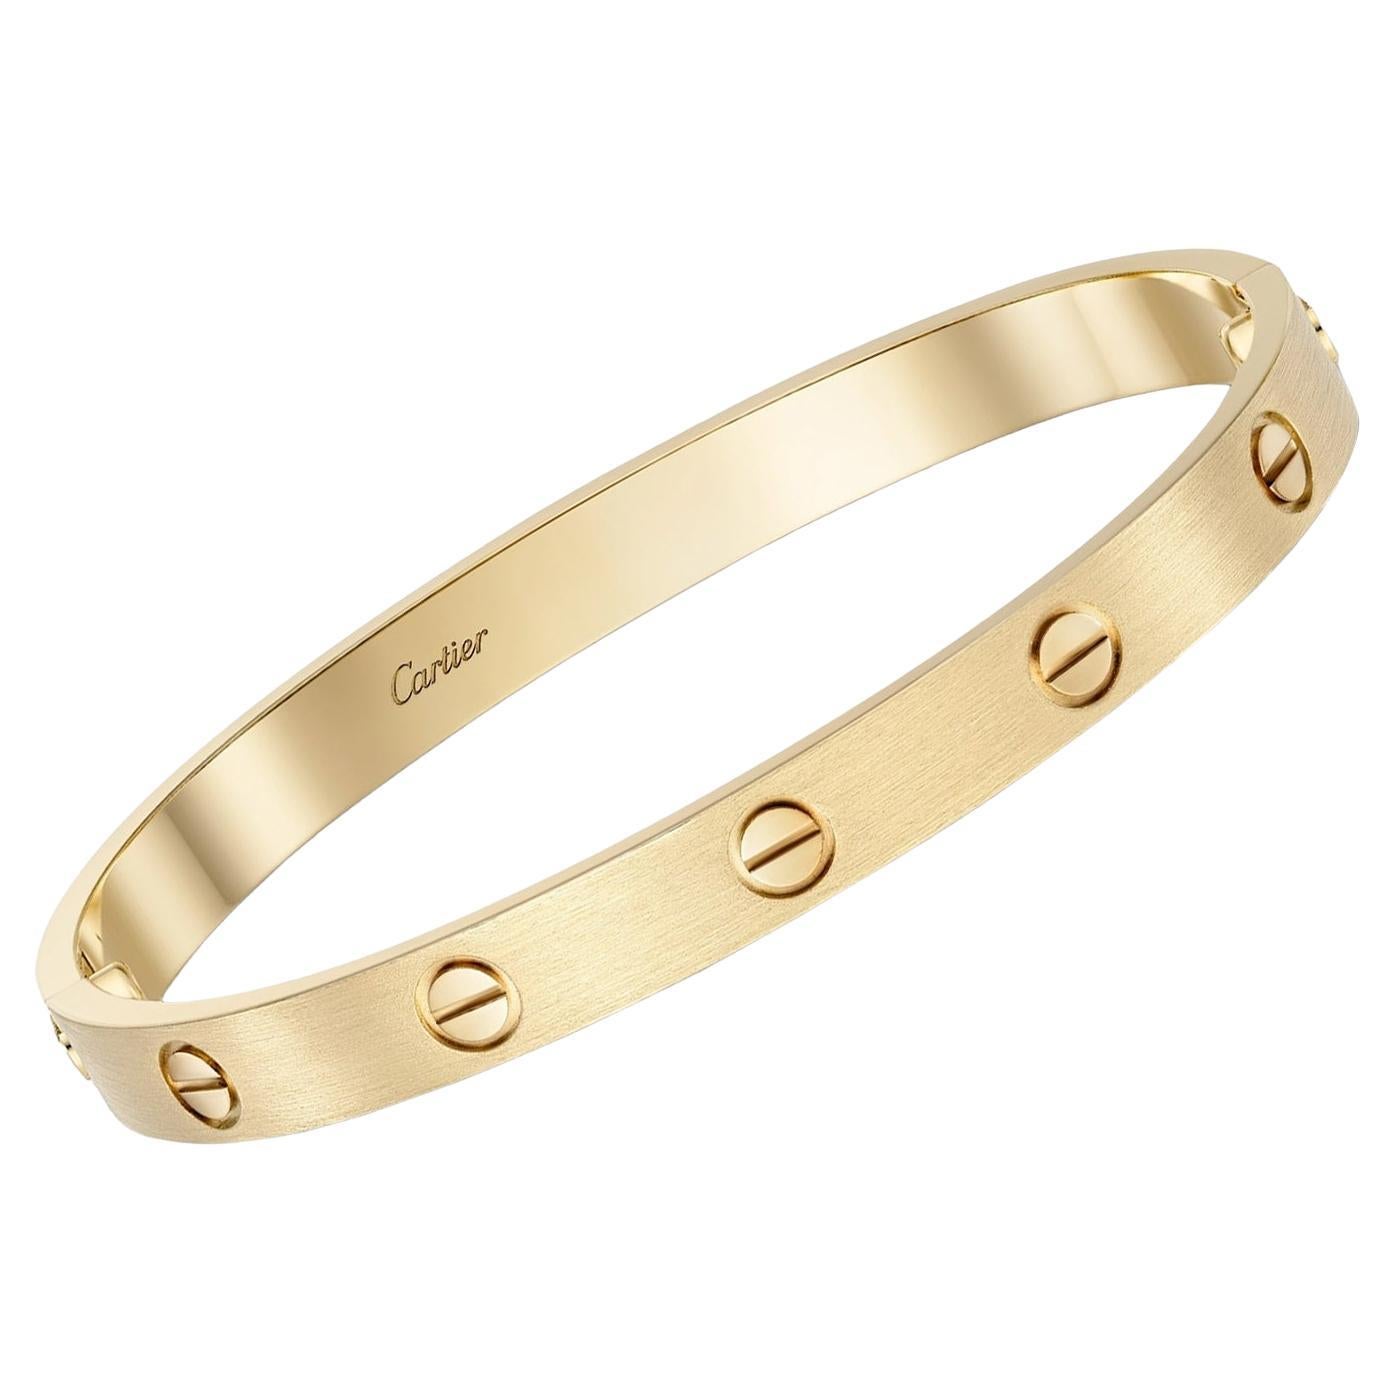 Cartier Love Bracelet 18K Yellow Gold Size 15 Brushed Finish with Screwdriver For Sale